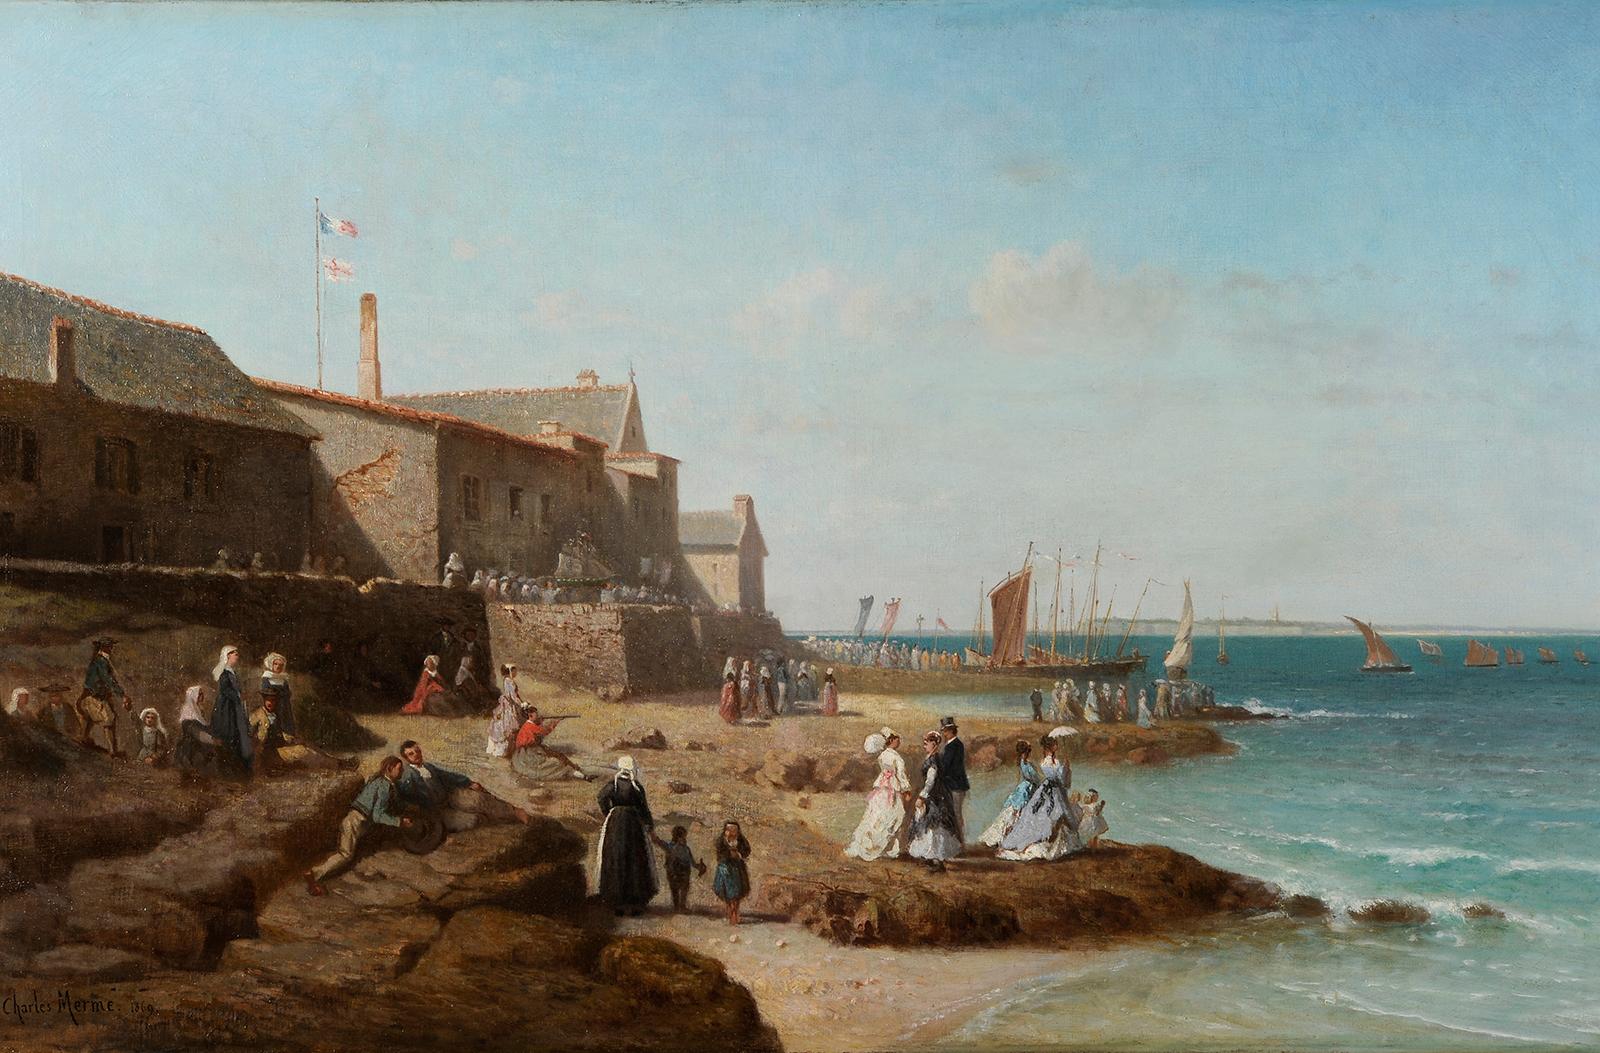 Charles Merme (1818-1869) The blessing of Coureau de Groix in Larmor Brittany - Painting by Charles Mermé